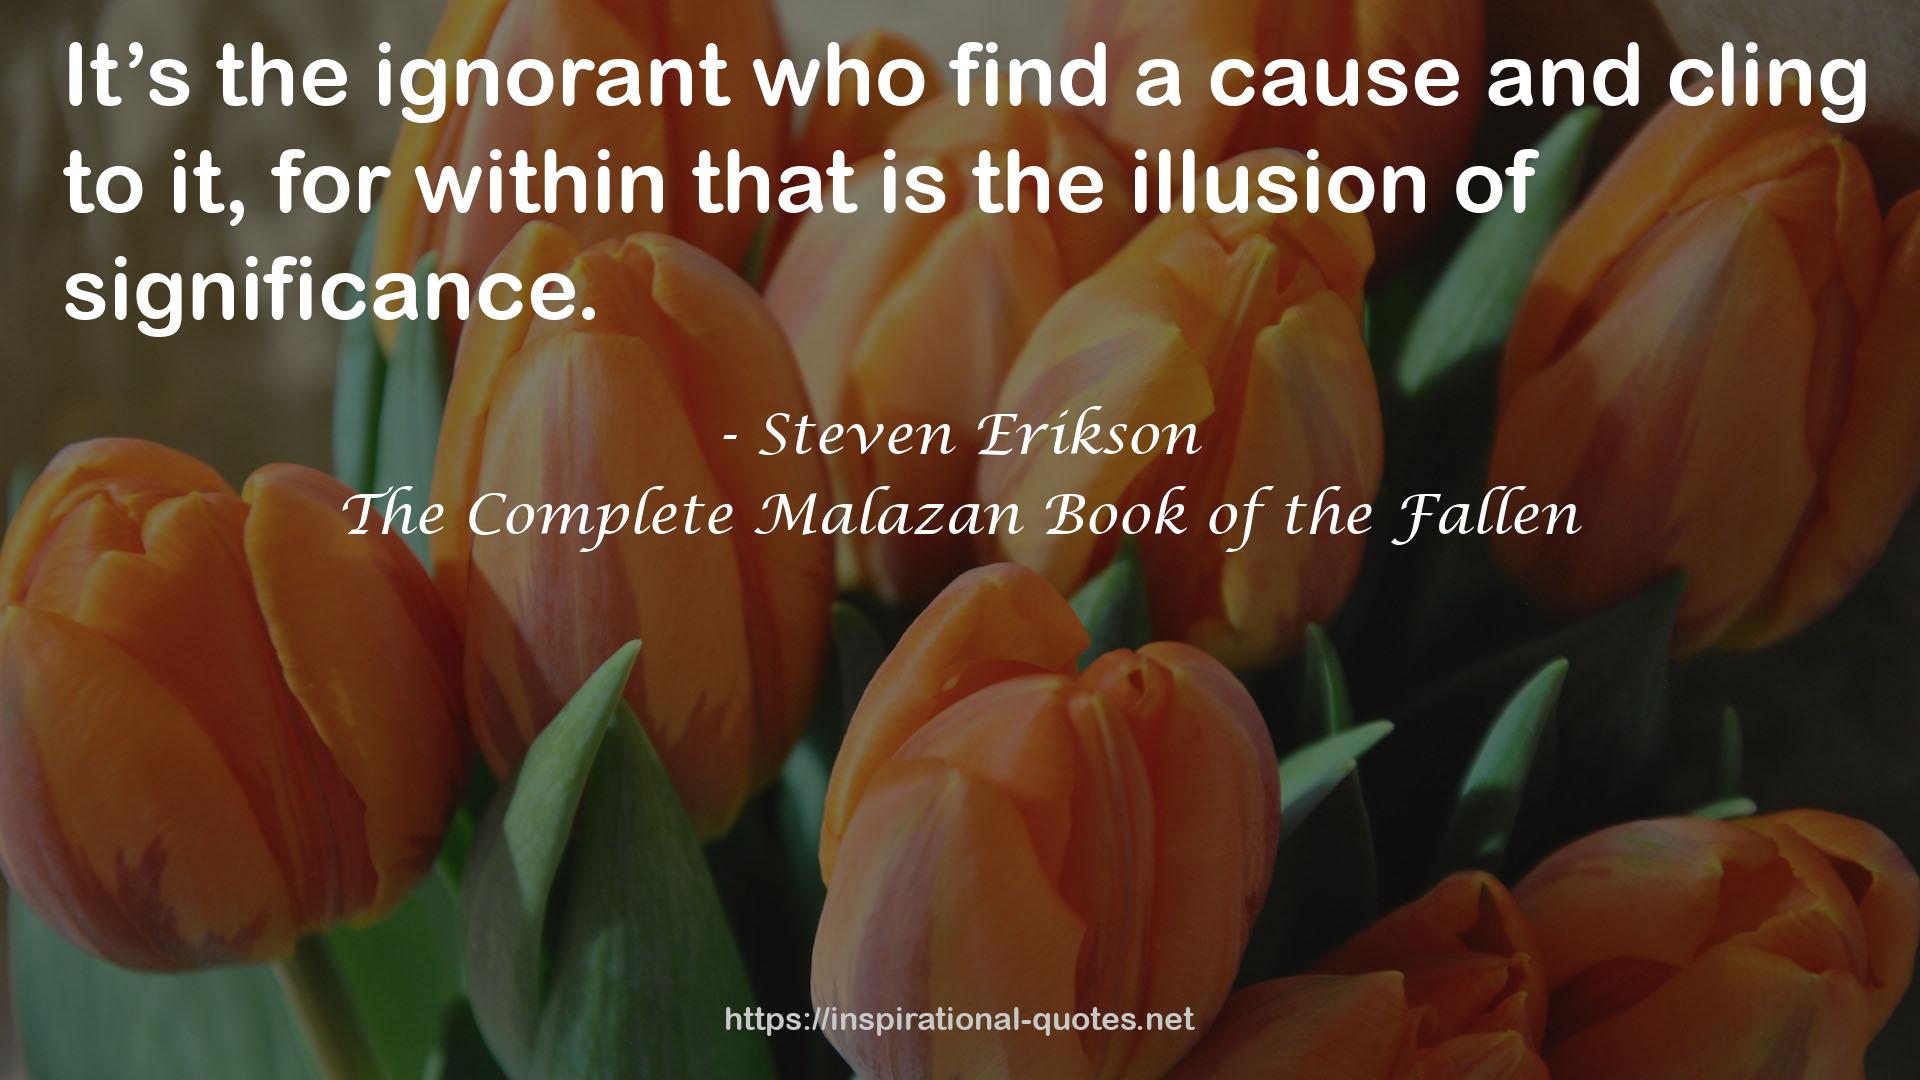 The Complete Malazan Book of the Fallen QUOTES